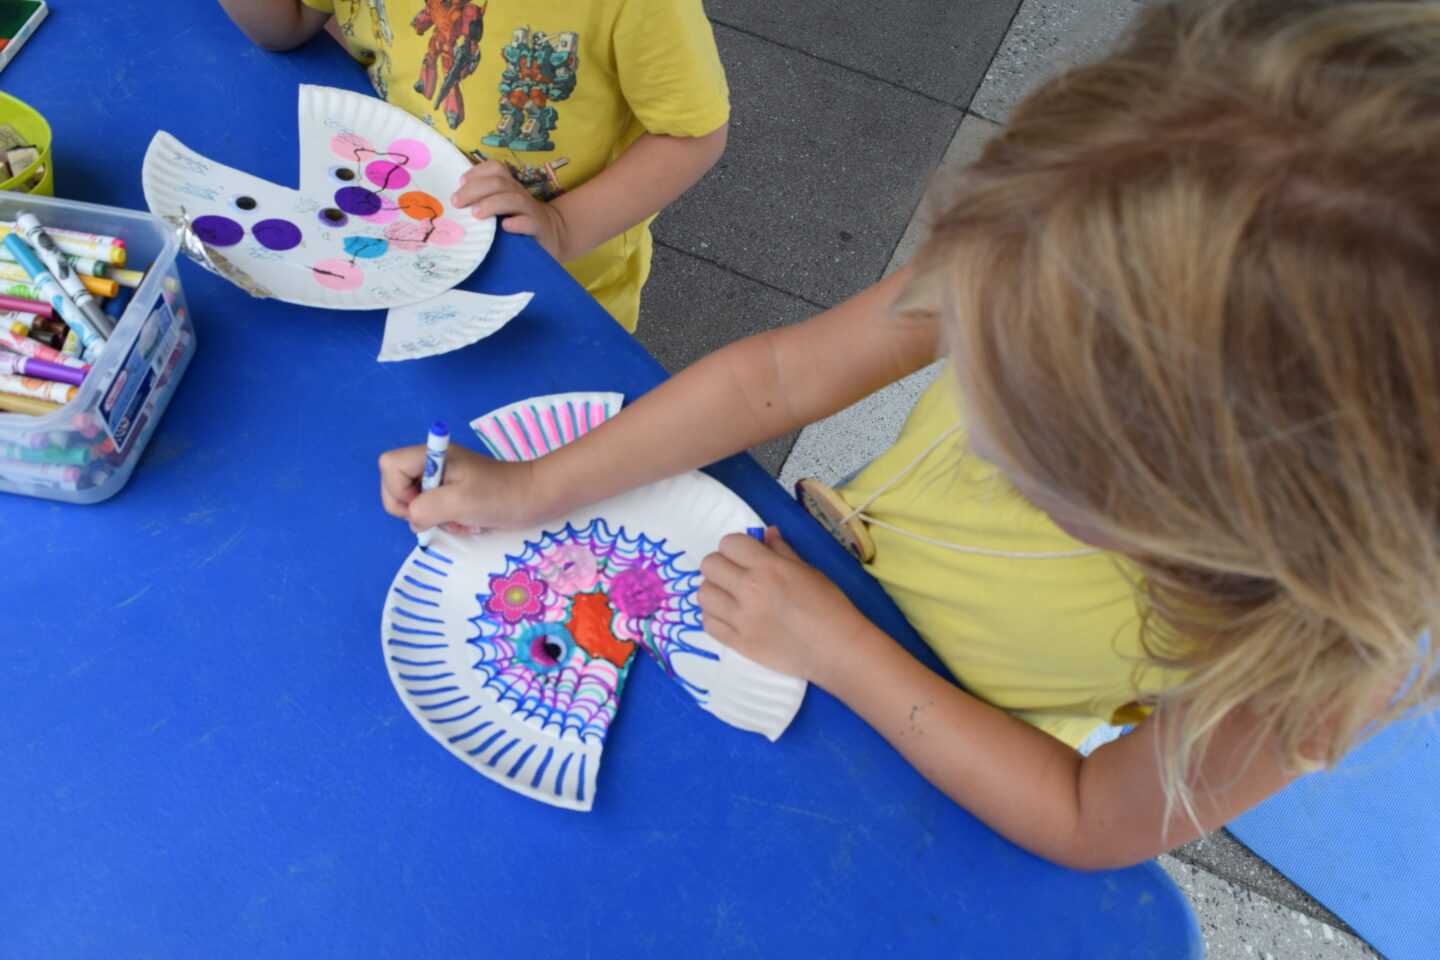 Two Sensory Science participants creating art with paper plates and markers